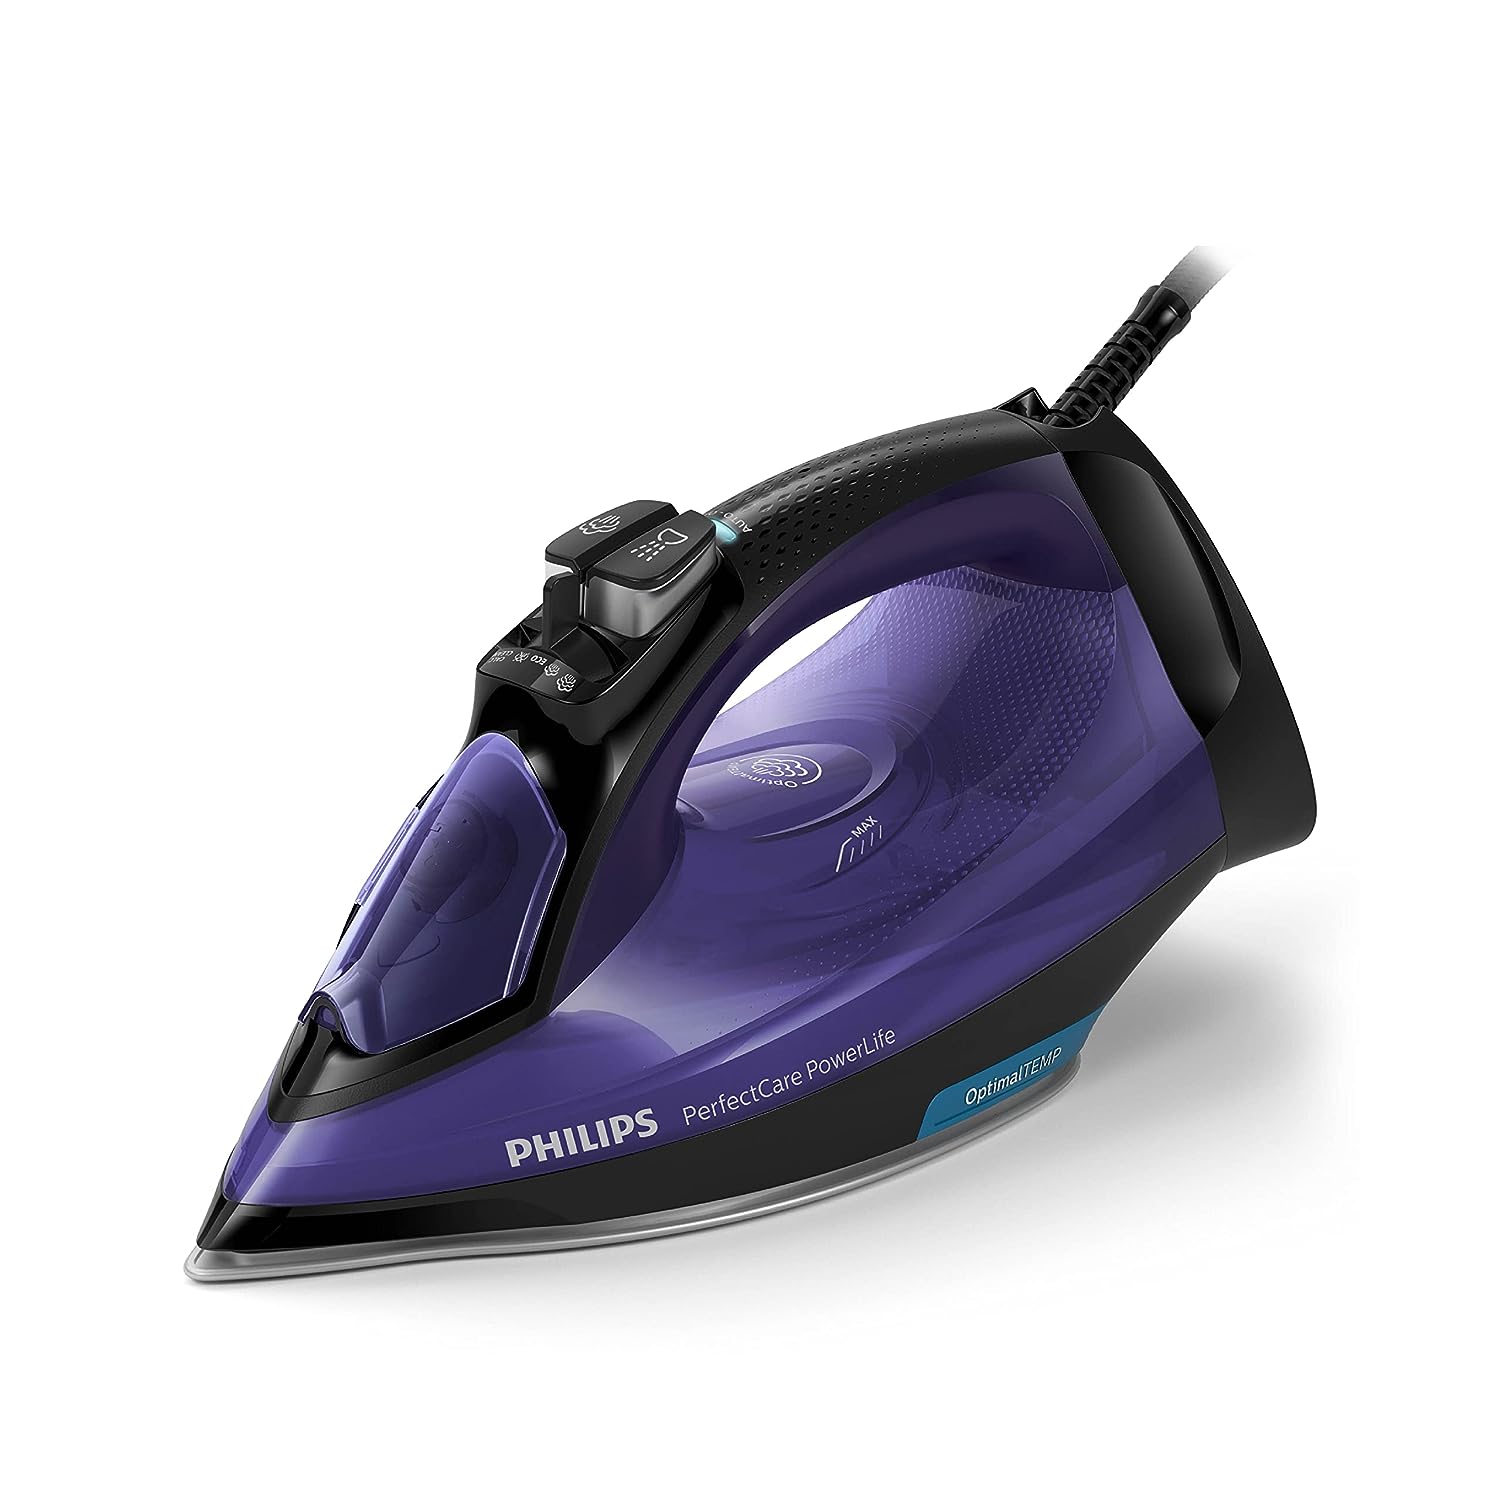 Philips Perfect Care Power Life Steam Iron GC3925/34, 2400W, up to 45 g/min steam Output